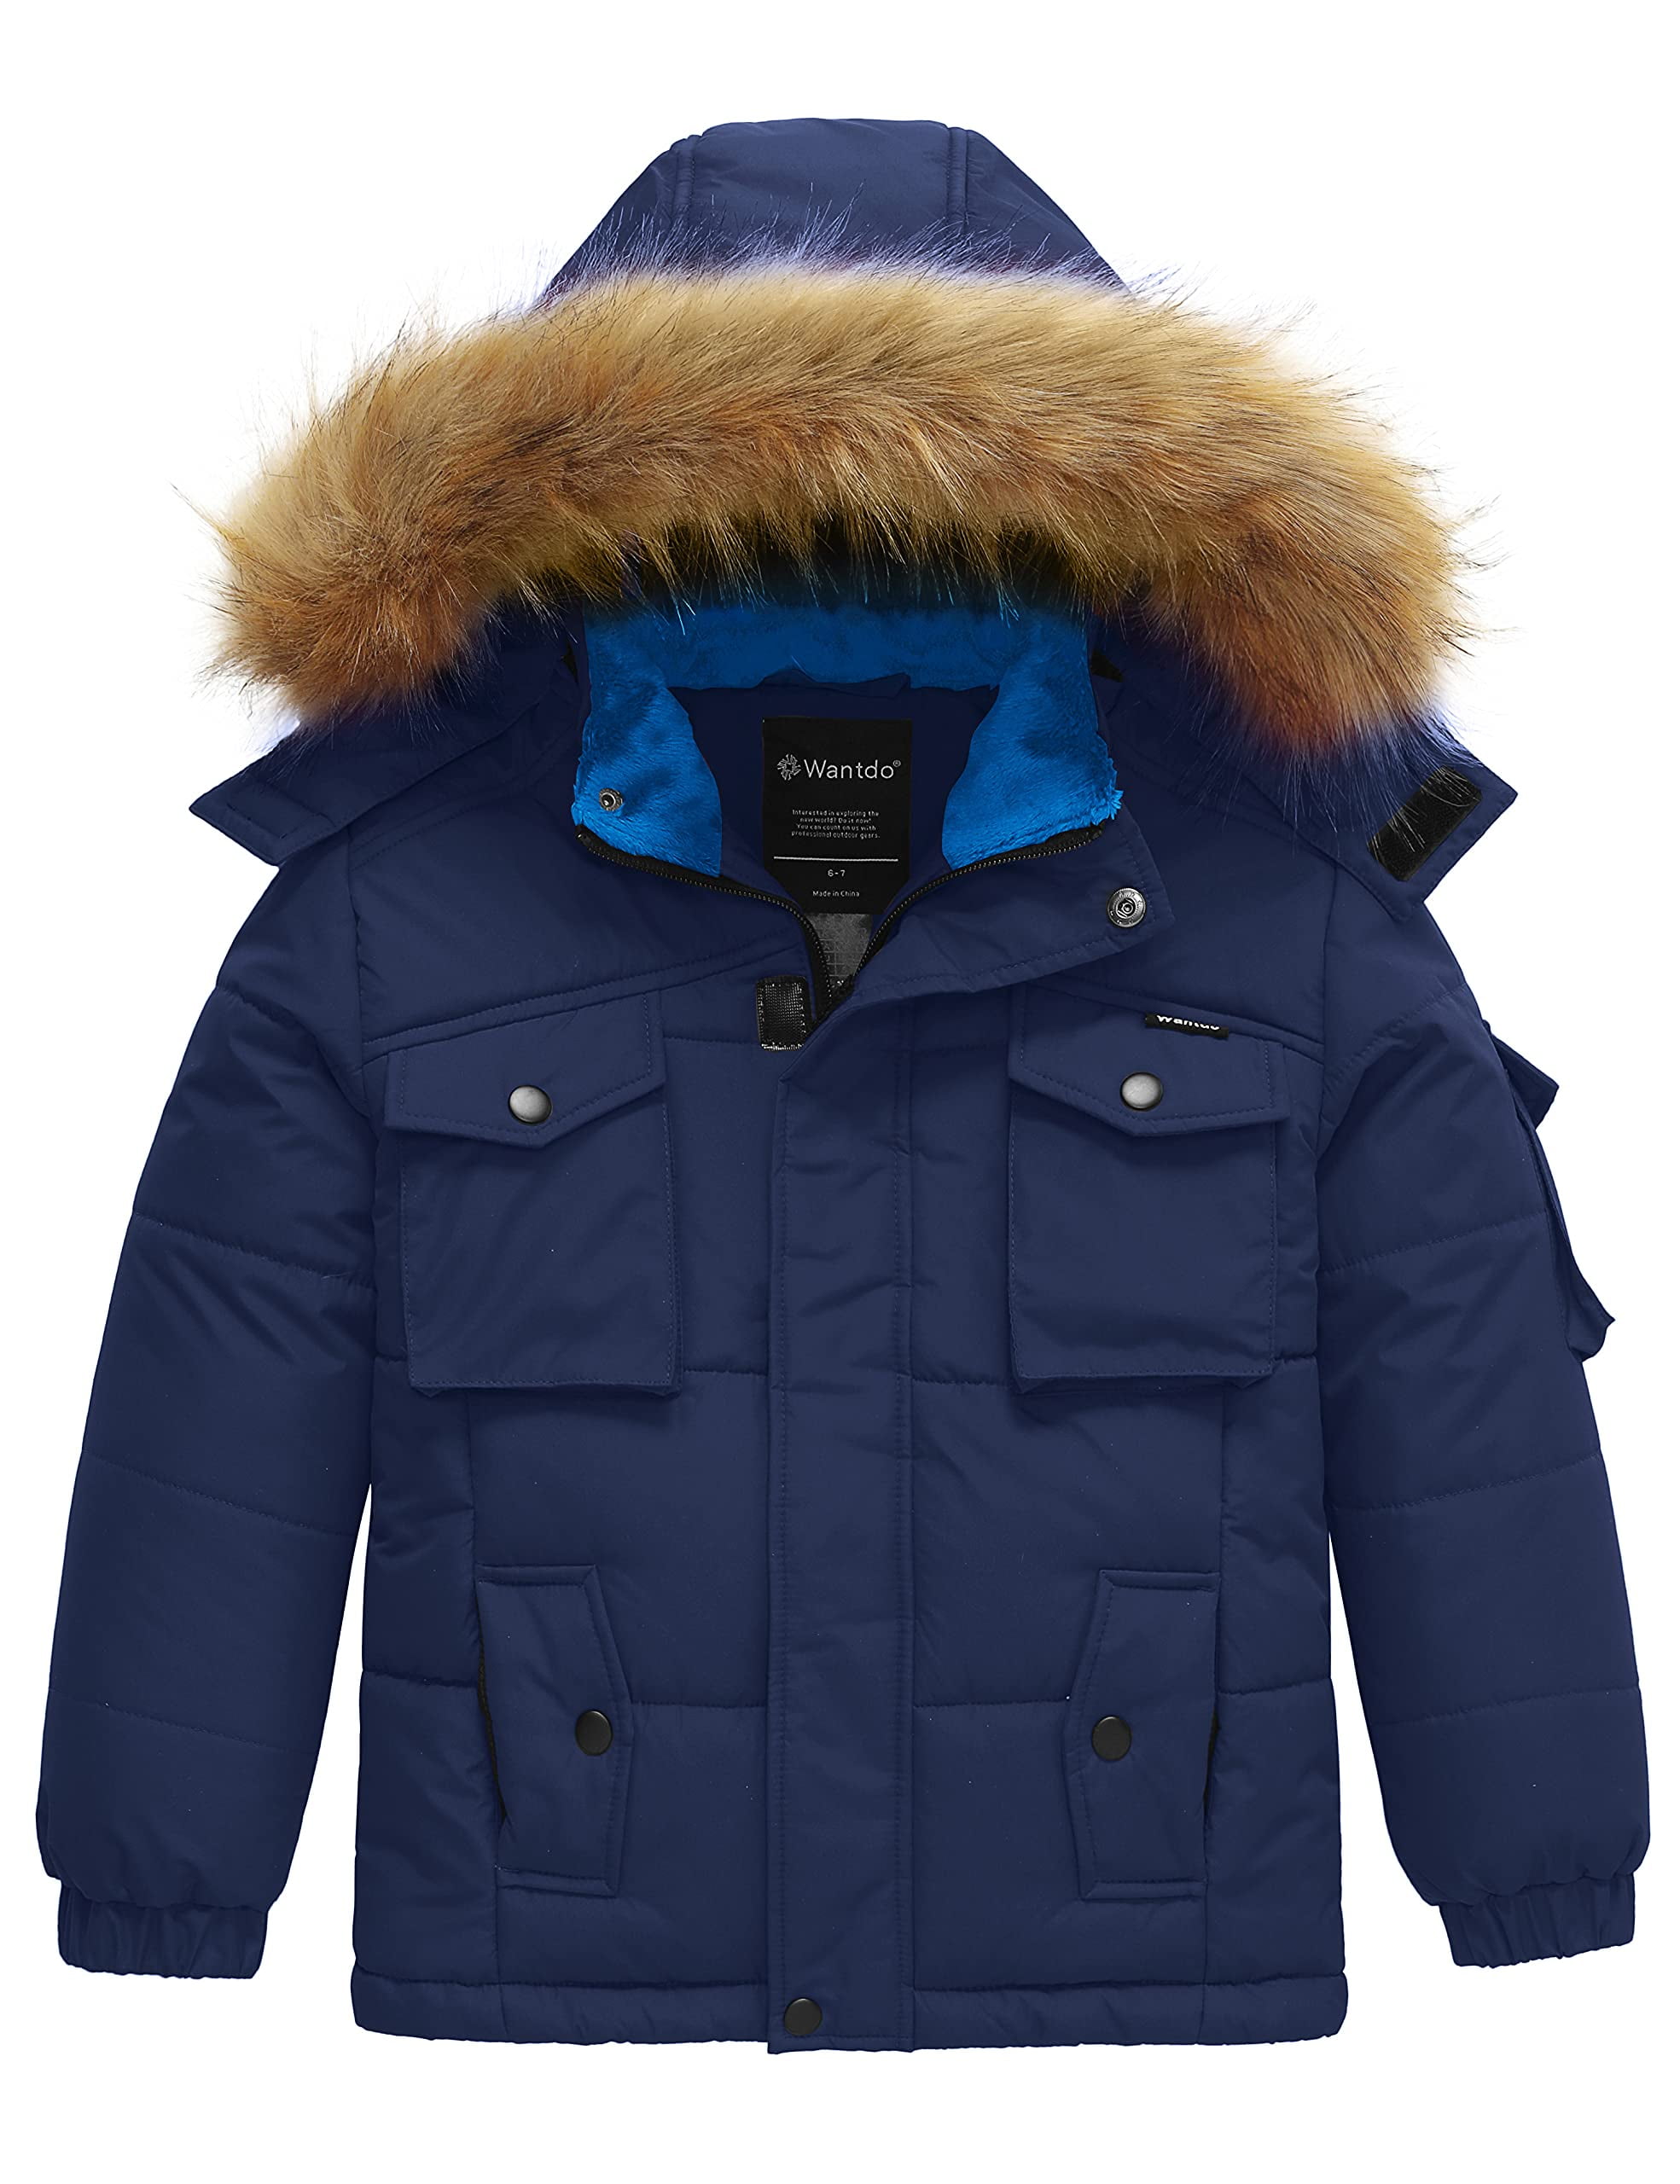 Wantdo Boys Padded Winter Coat Water-Resistant Puffer Jacket with Removable Hood 